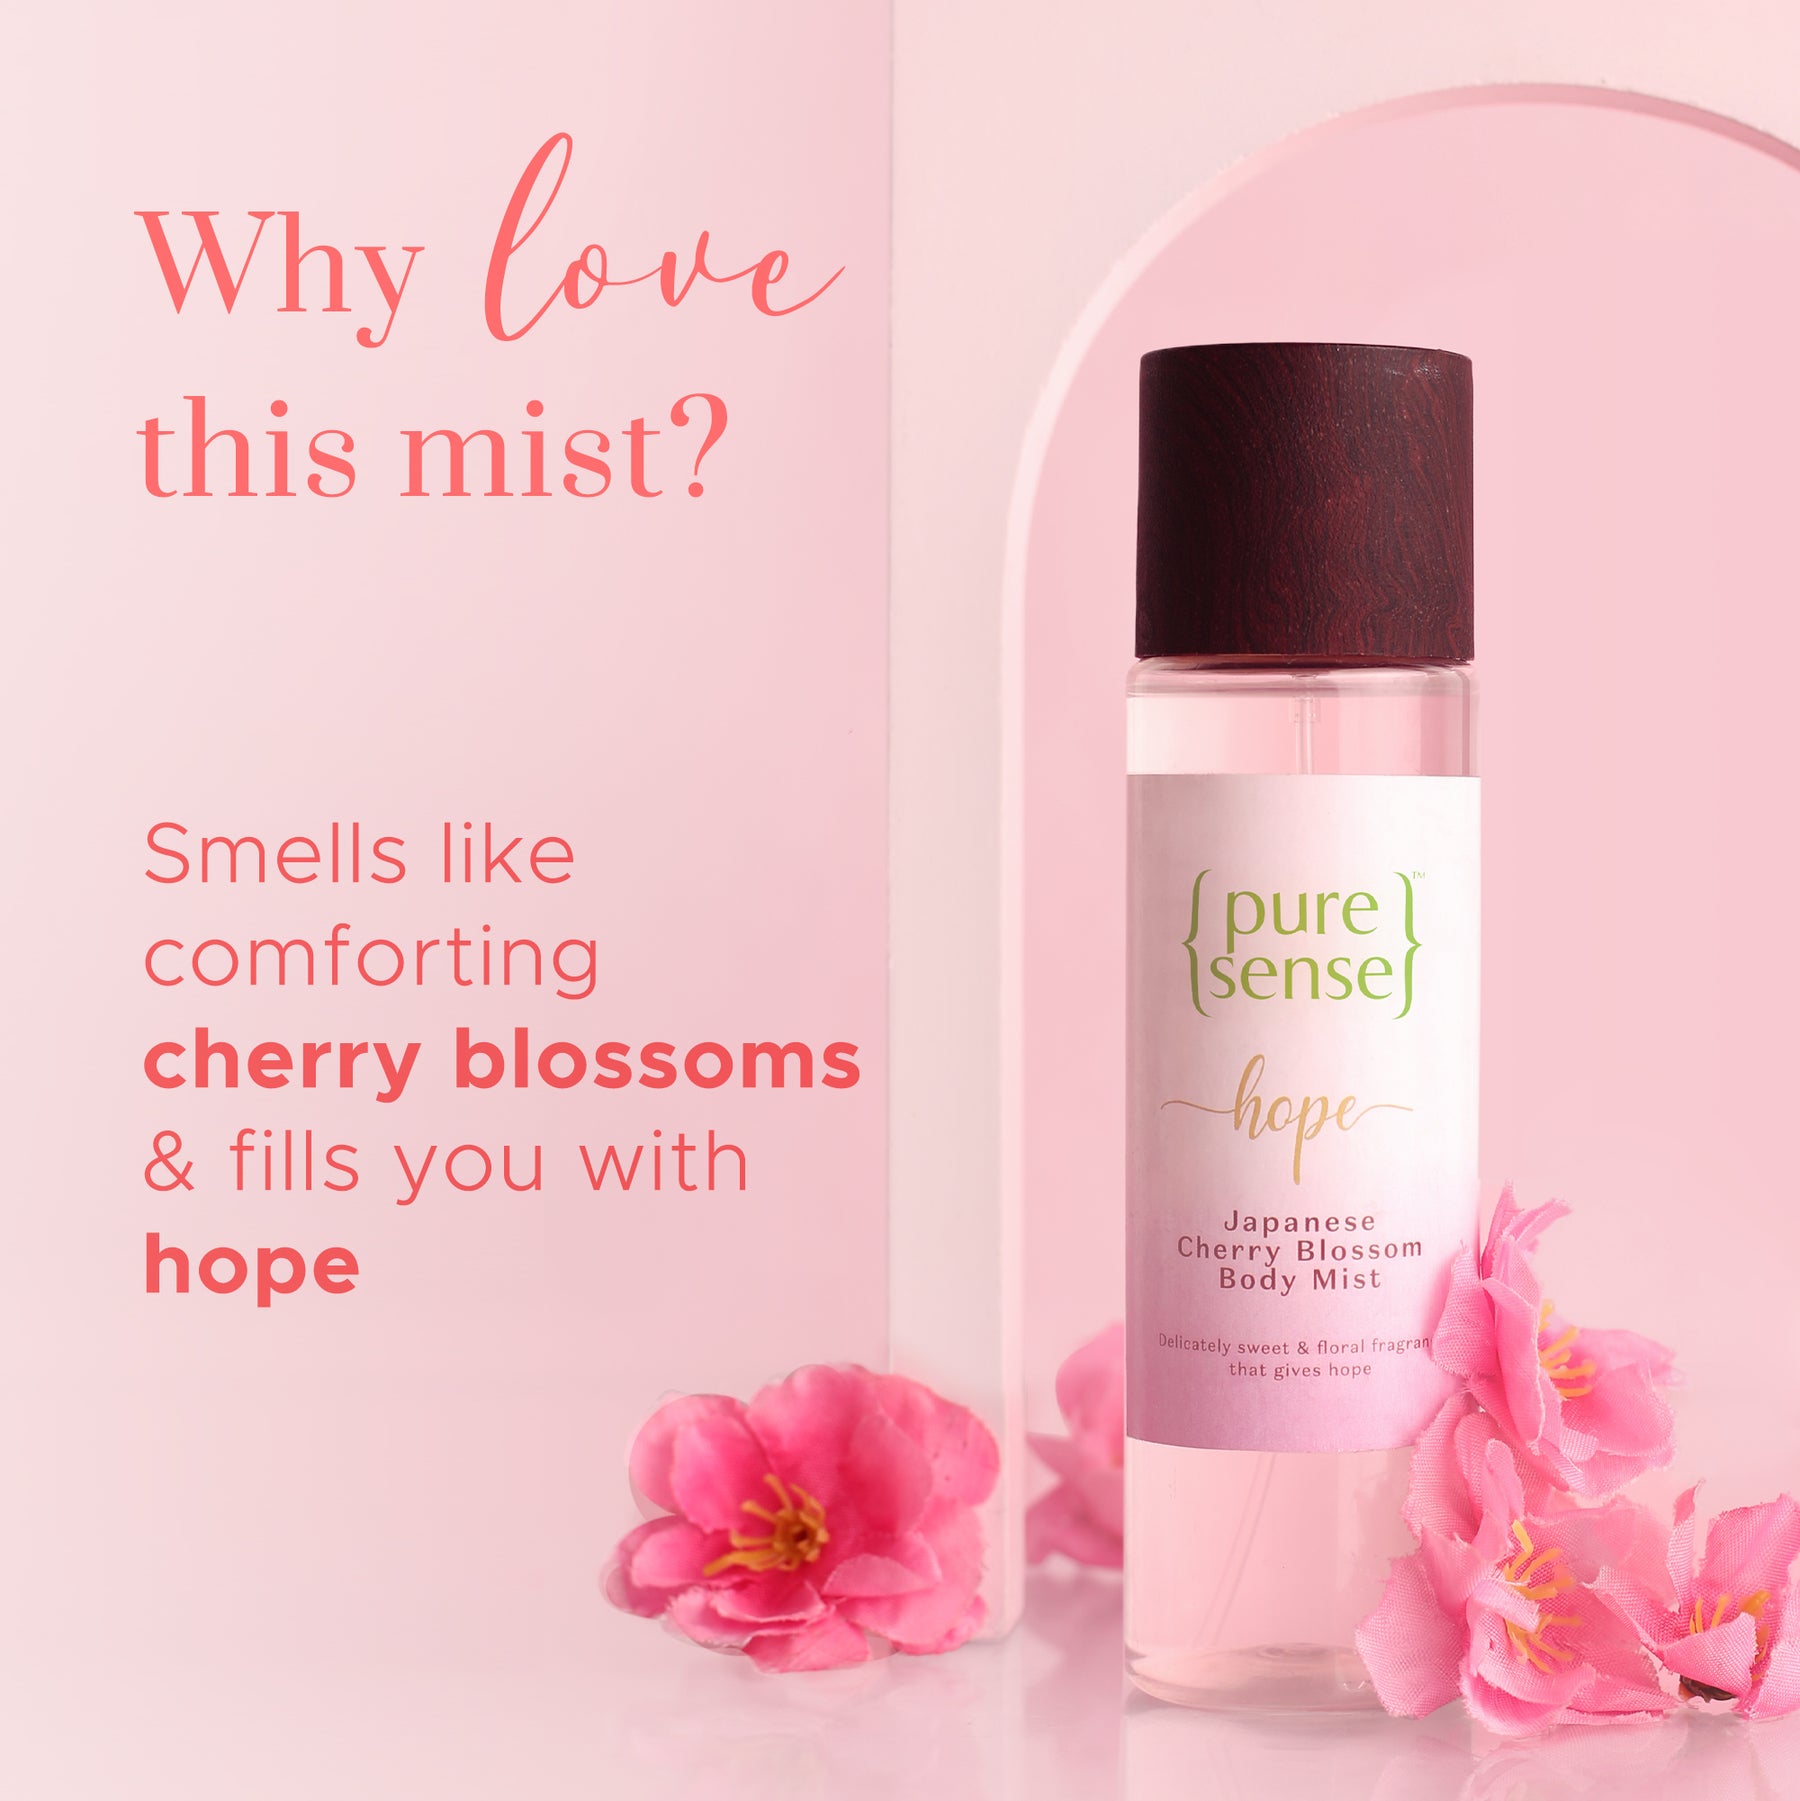 Hope Japanese Cherry Blossom Body Mist (Pack of 3) | From the makers of Parachute Advansed | 450ml - PureSense